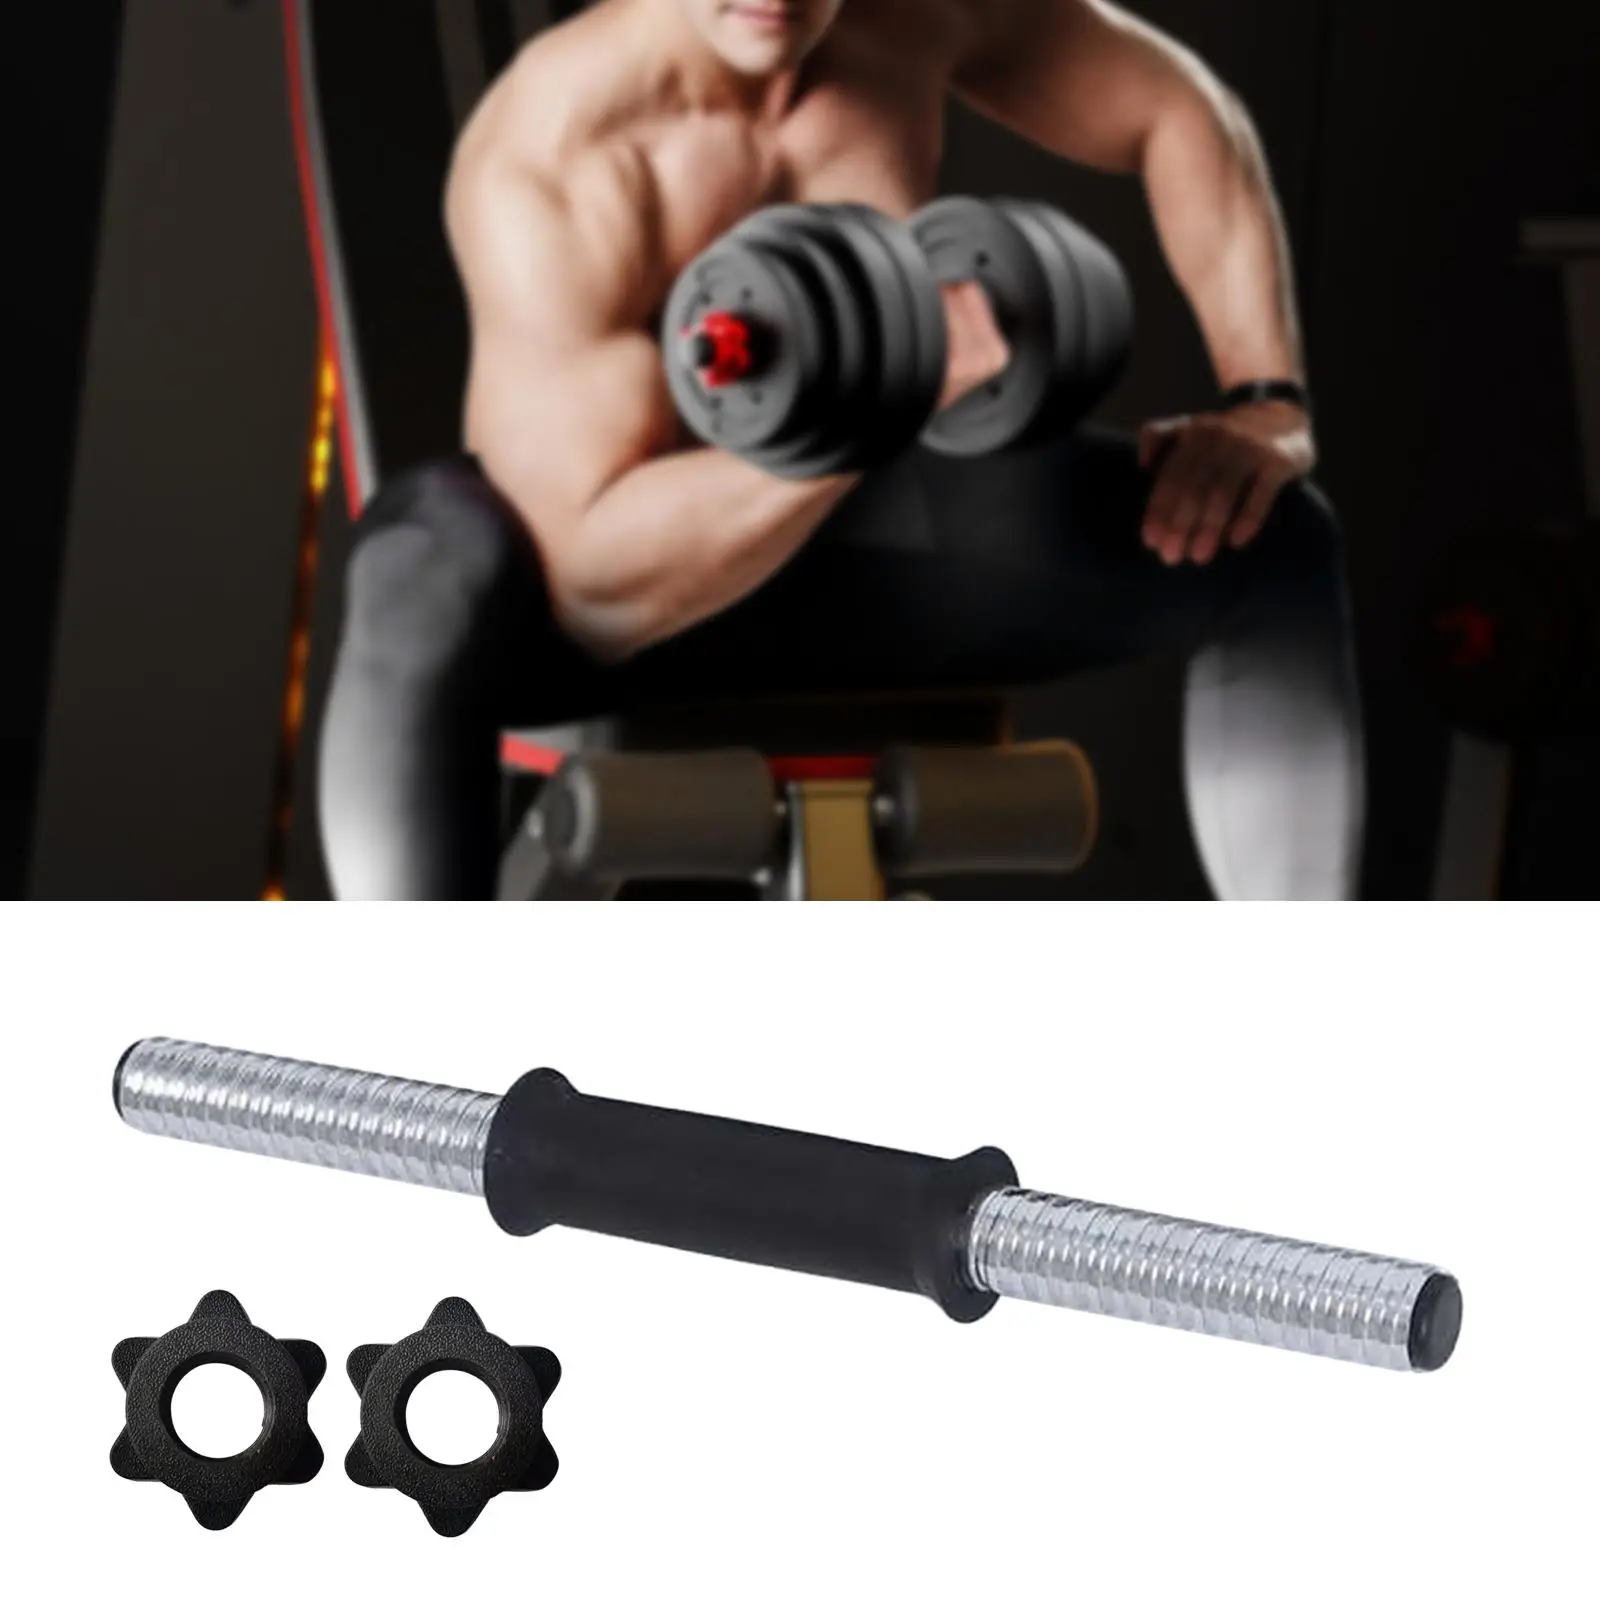 Dumbbell Bar Dumbbell Accessories Dumbbell Extension Bar Strength Training for Exercise Muscle Building Sport Barbells Training